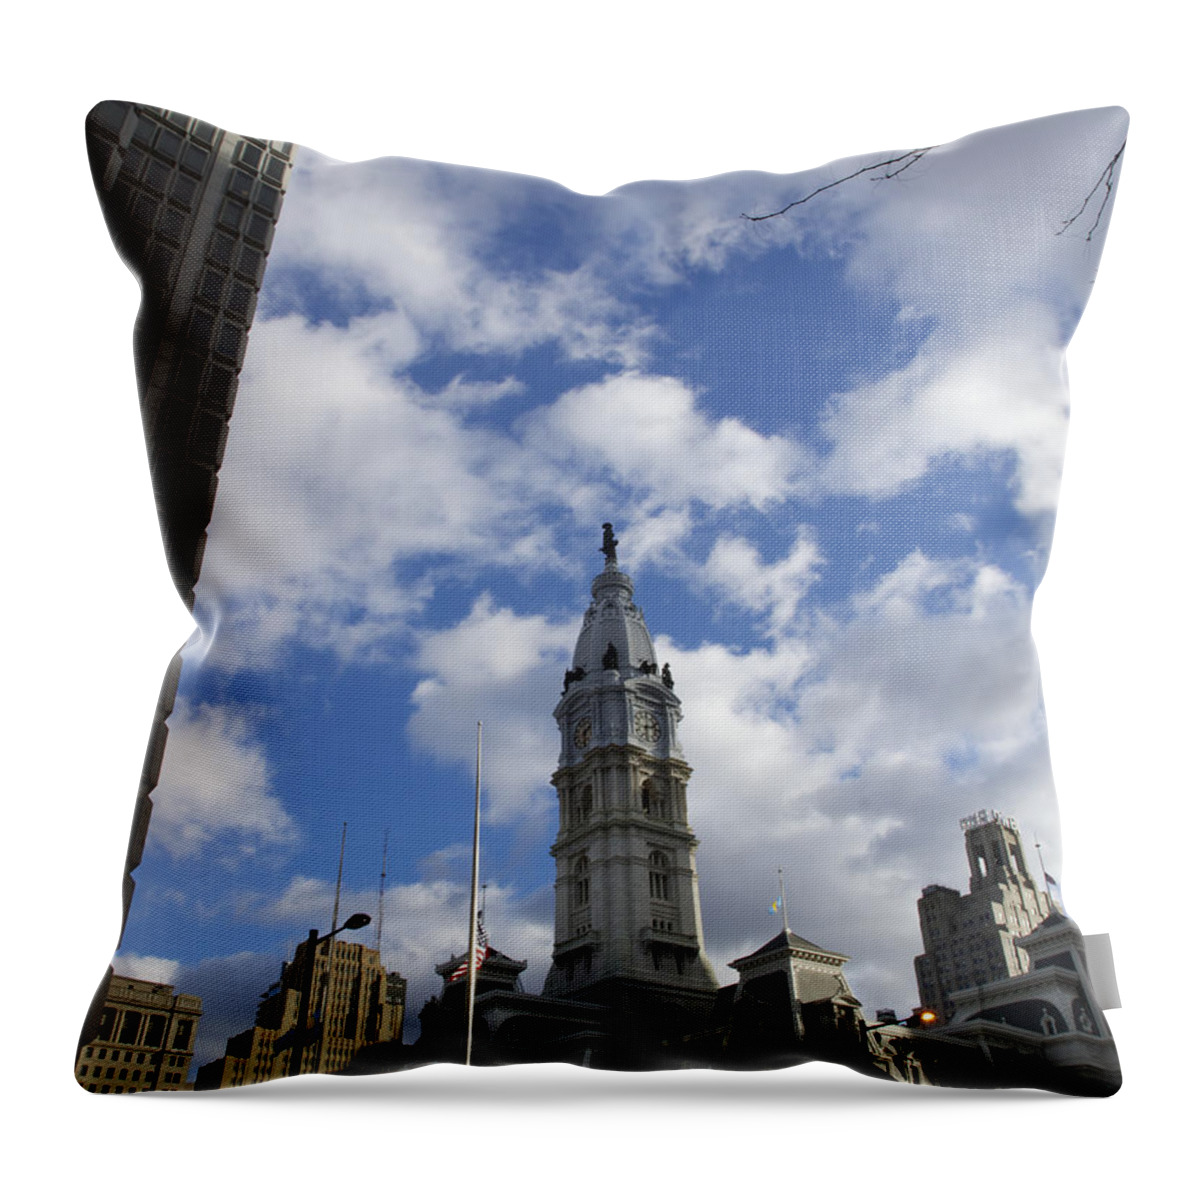 Billy Penn Throw Pillow featuring the photograph City Hall by Photographic Arts And Design Studio